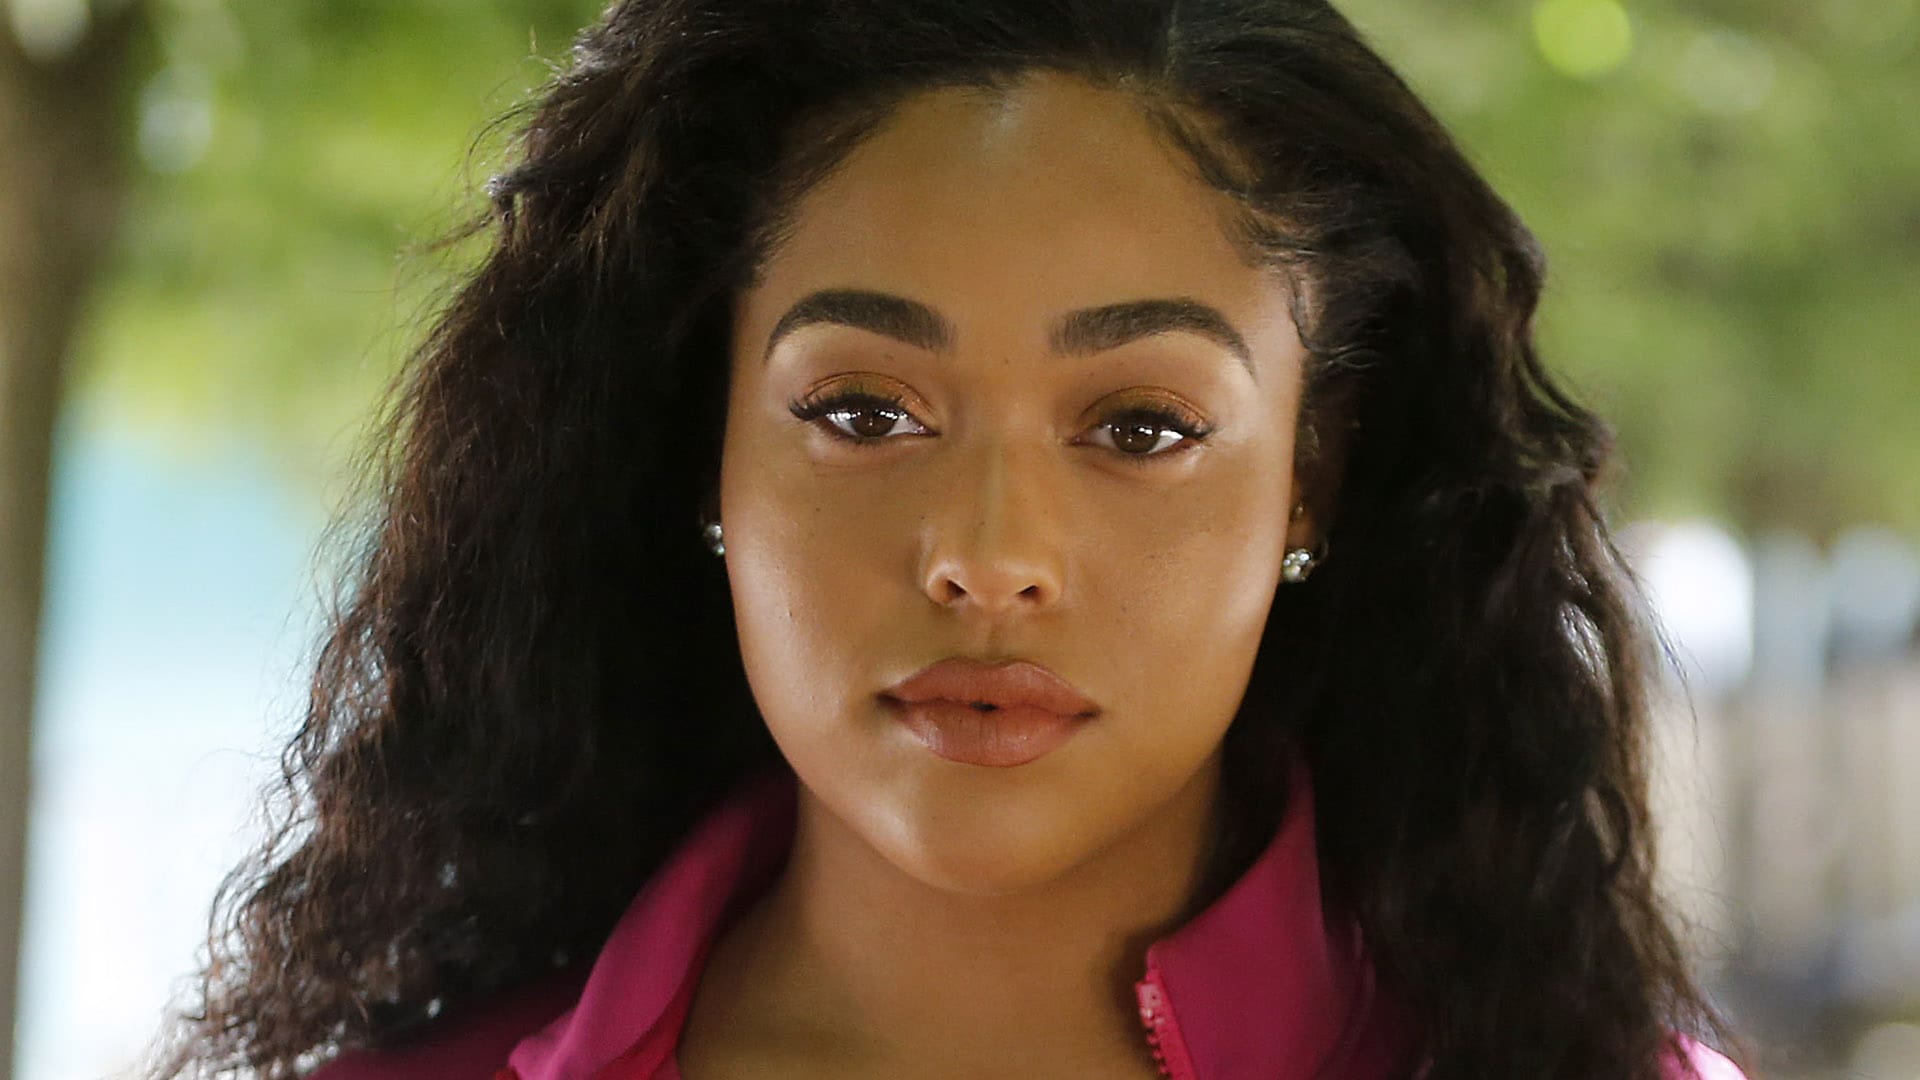 Jordyn Woods Talks About Her Tattoo And Shares More Pics From Her Dreamy Vacay Amidst The Global Coronavirus Crisis